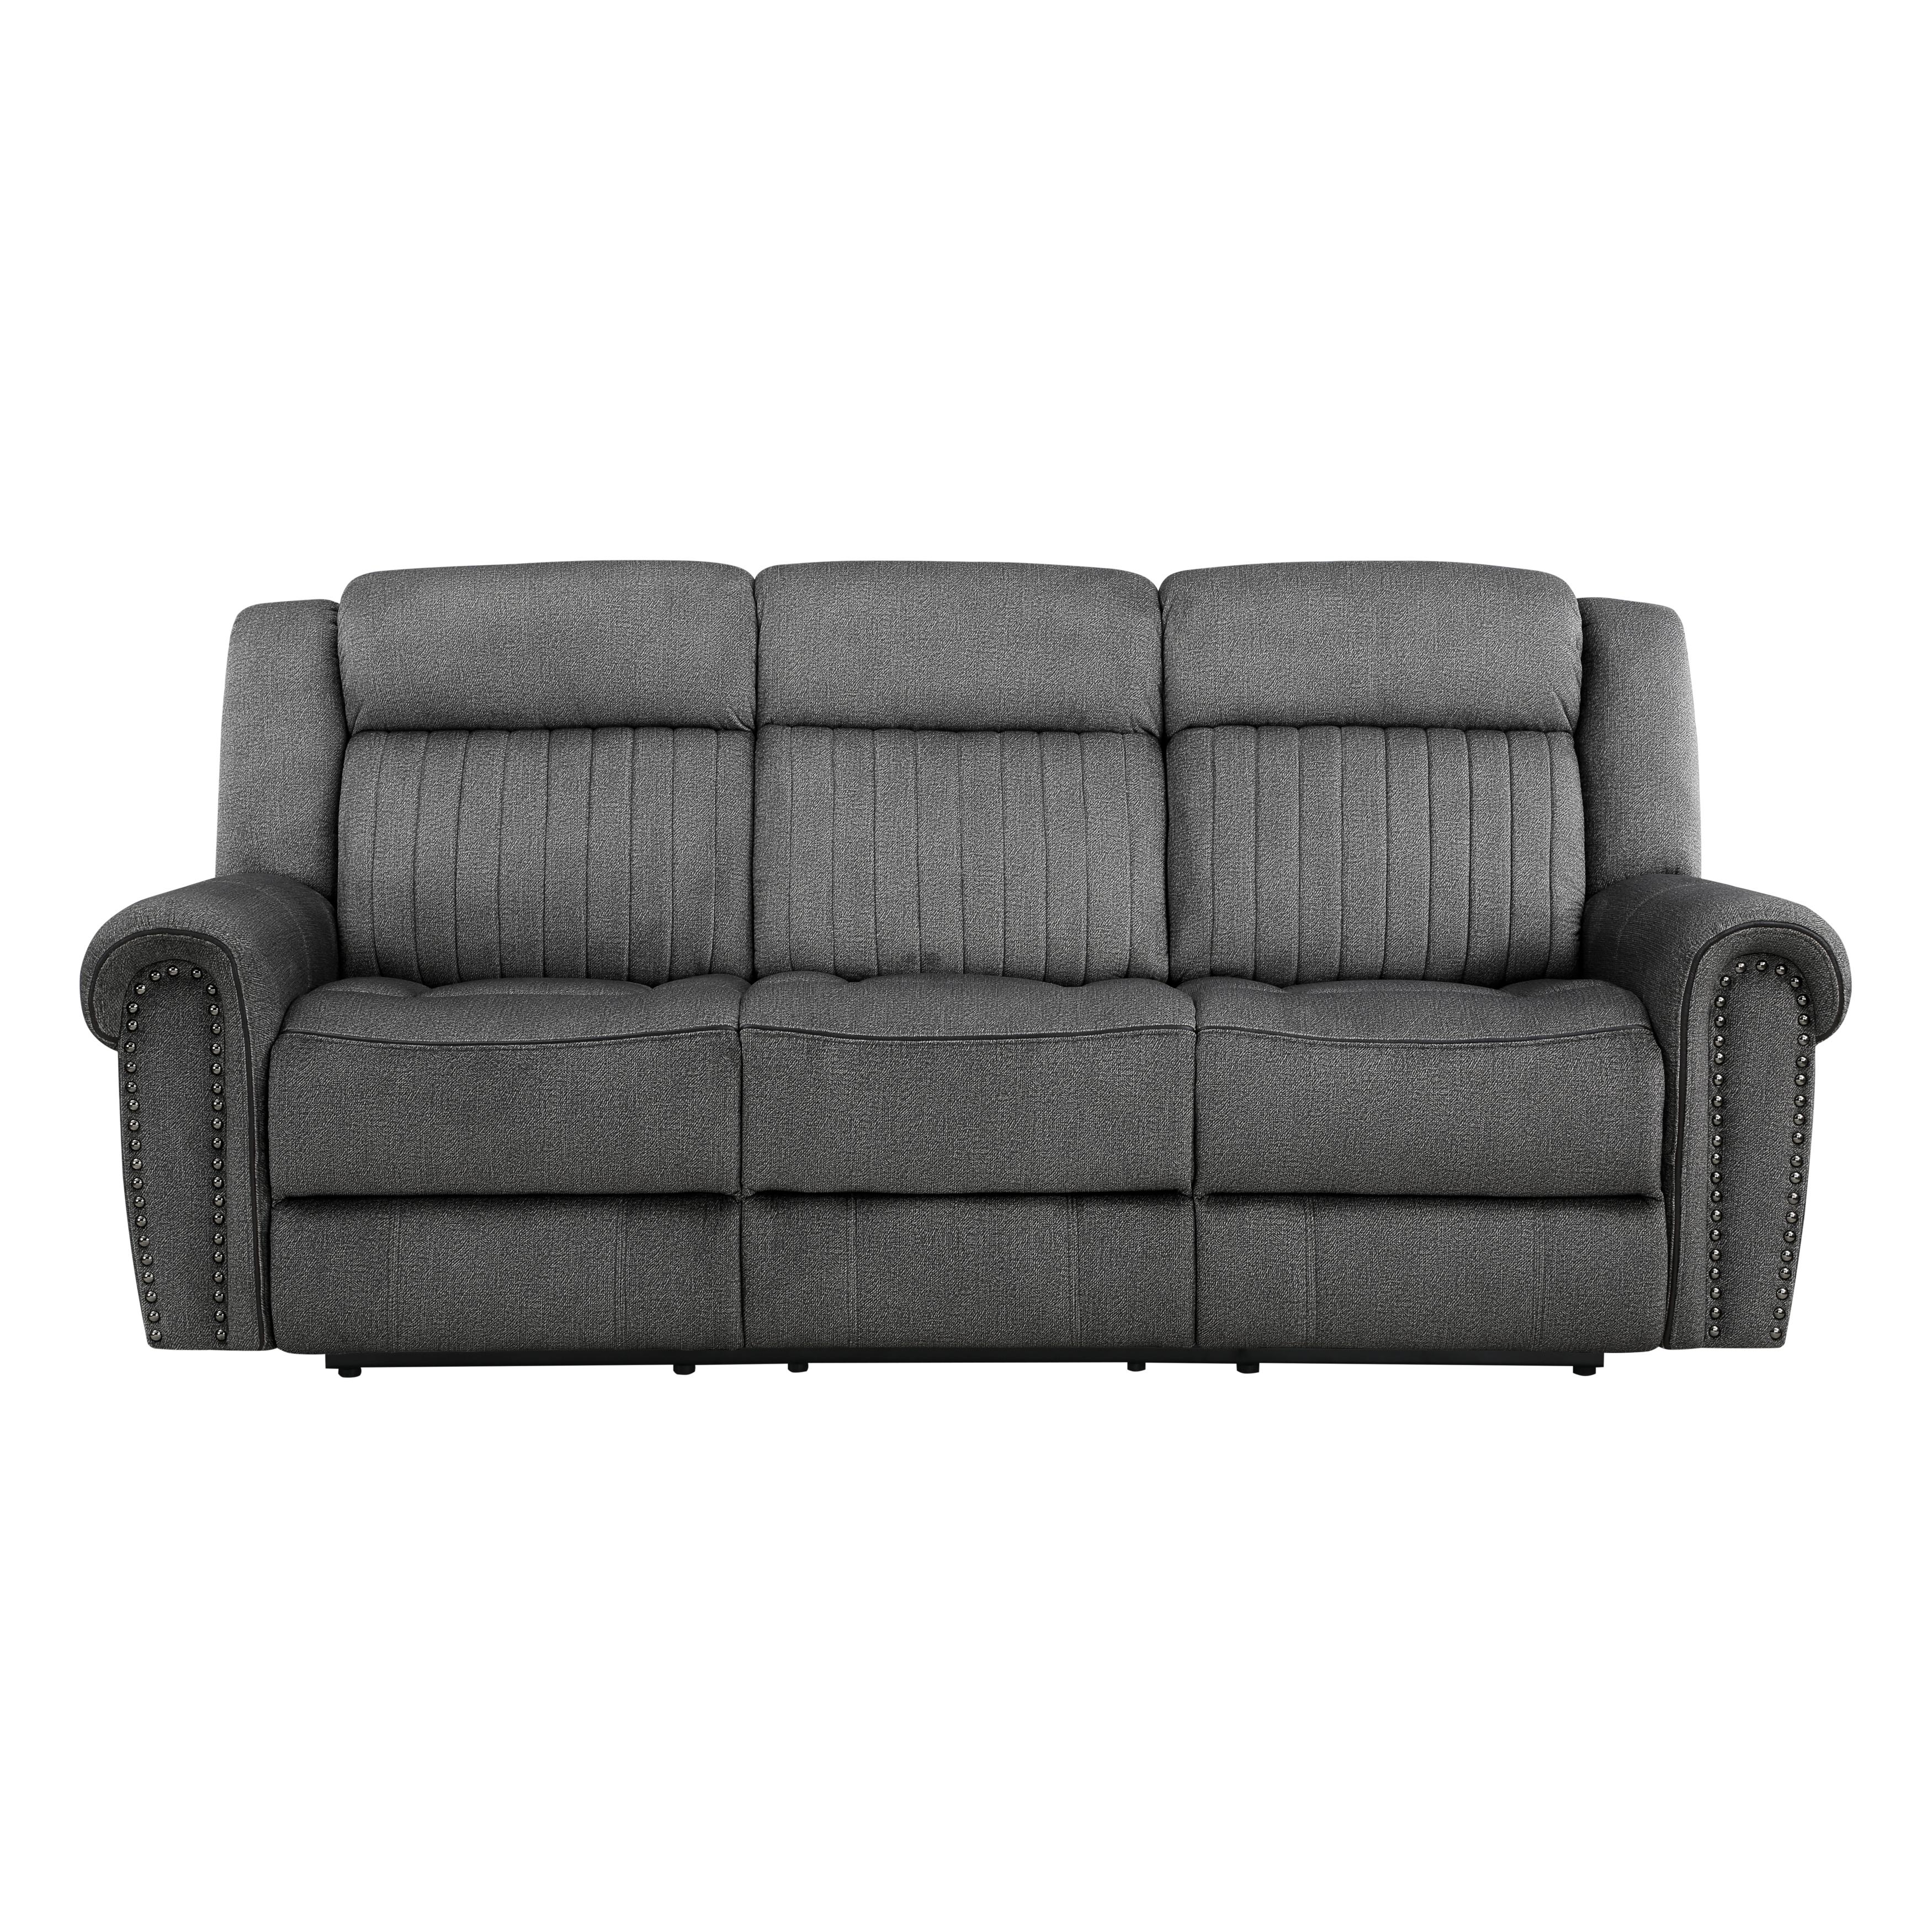 Transitional Power Reclining Sofa 9204CC-3PW Brennen 9204CC-3PW in Charcoal Microfiber